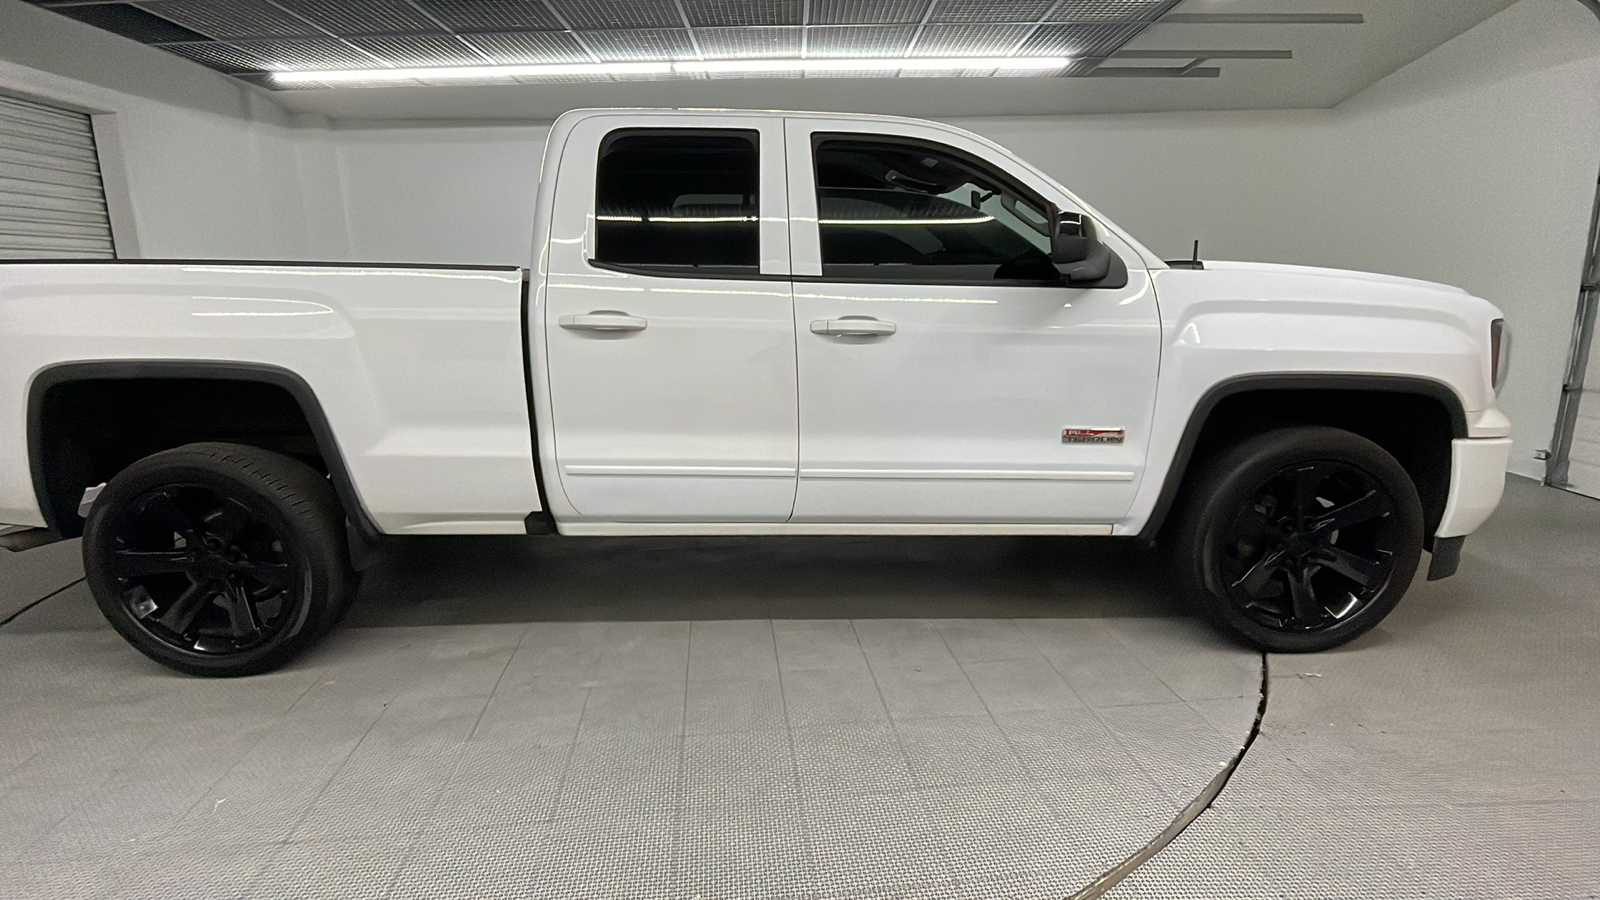 Car Connection Superstore - Used vehicle - Truck GMC SIERRA 1500 QUAD 2018